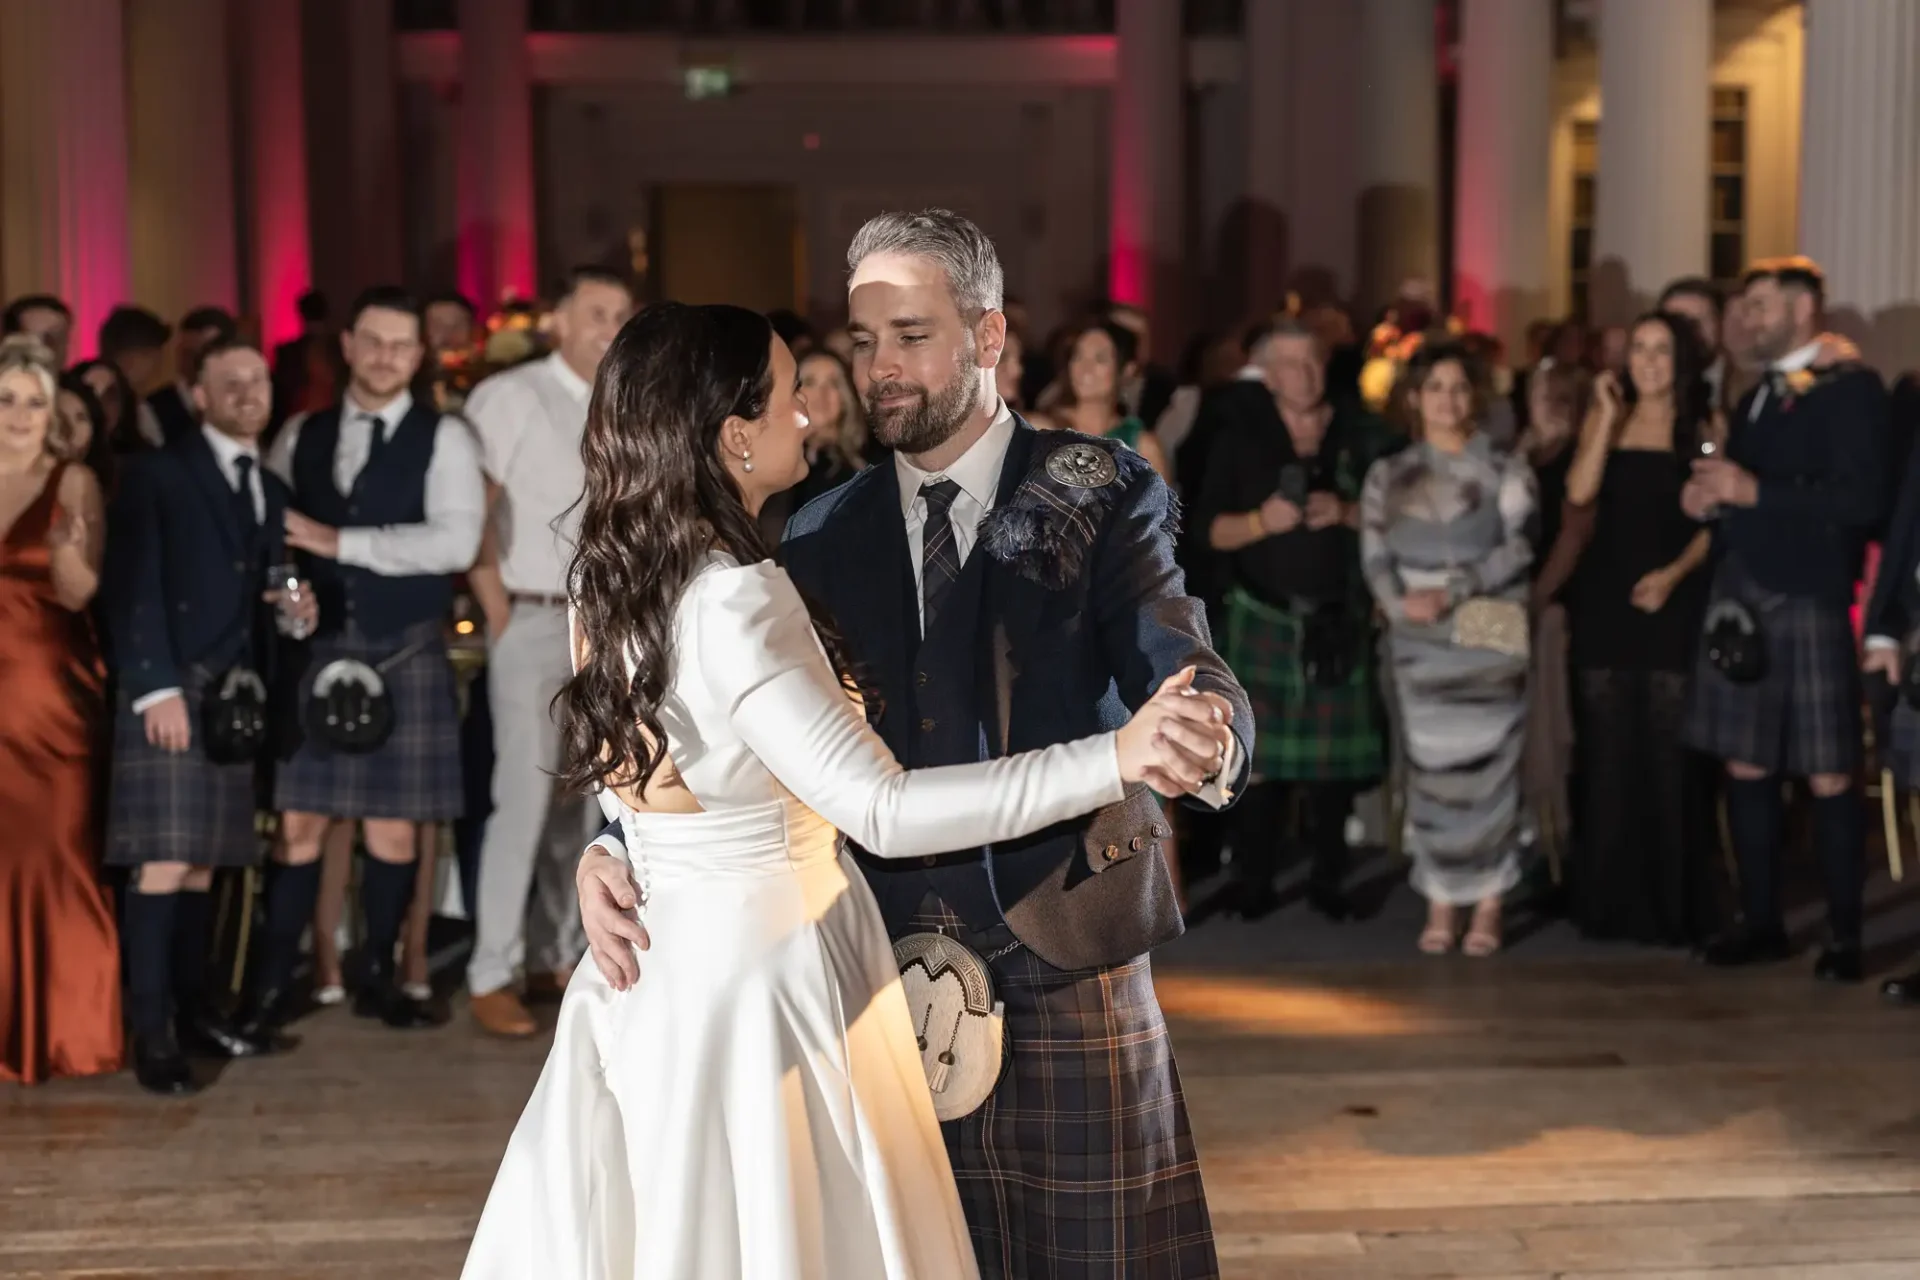 A couple in wedding attire dances in front of an audience, the man wearing a kilt and the woman in a white gown.